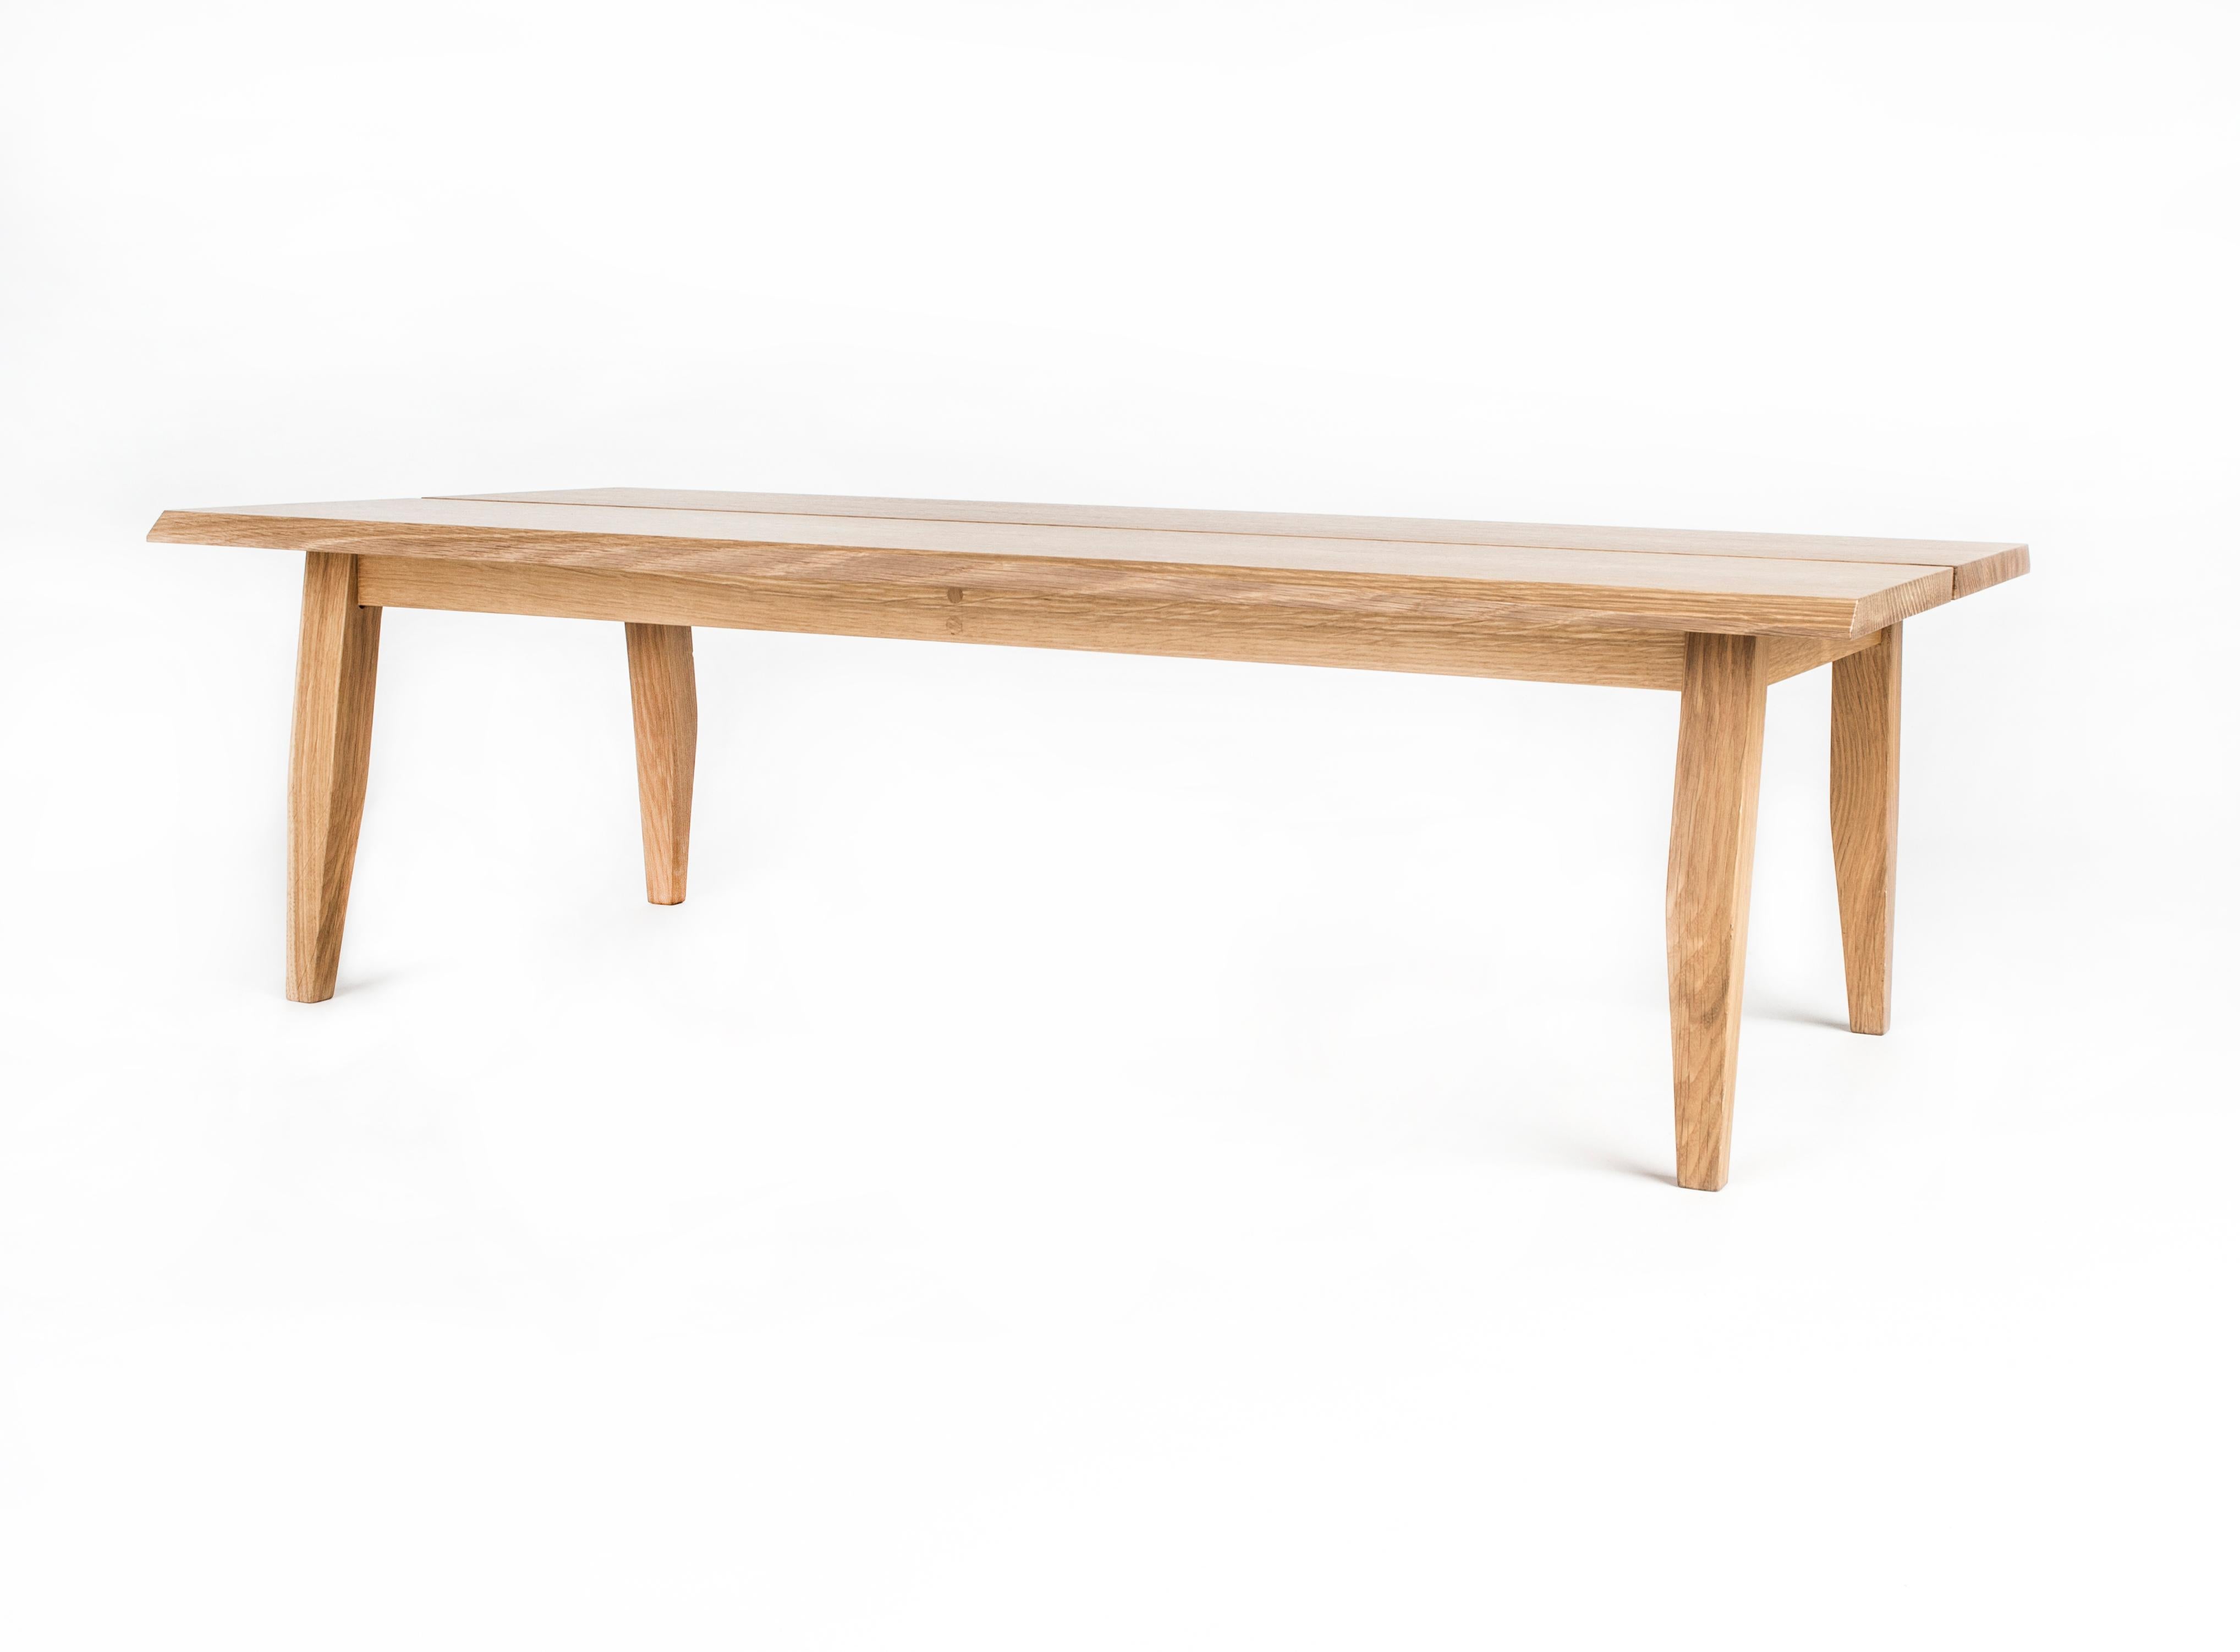 This low coffee table is made from hardwood brought together with the subtle tapers found in all the Rift pieces. Fits perfectly with lower modern sofas. Modern styling, handmade out of hardwood and shown here in white oak. Perfect for apartment